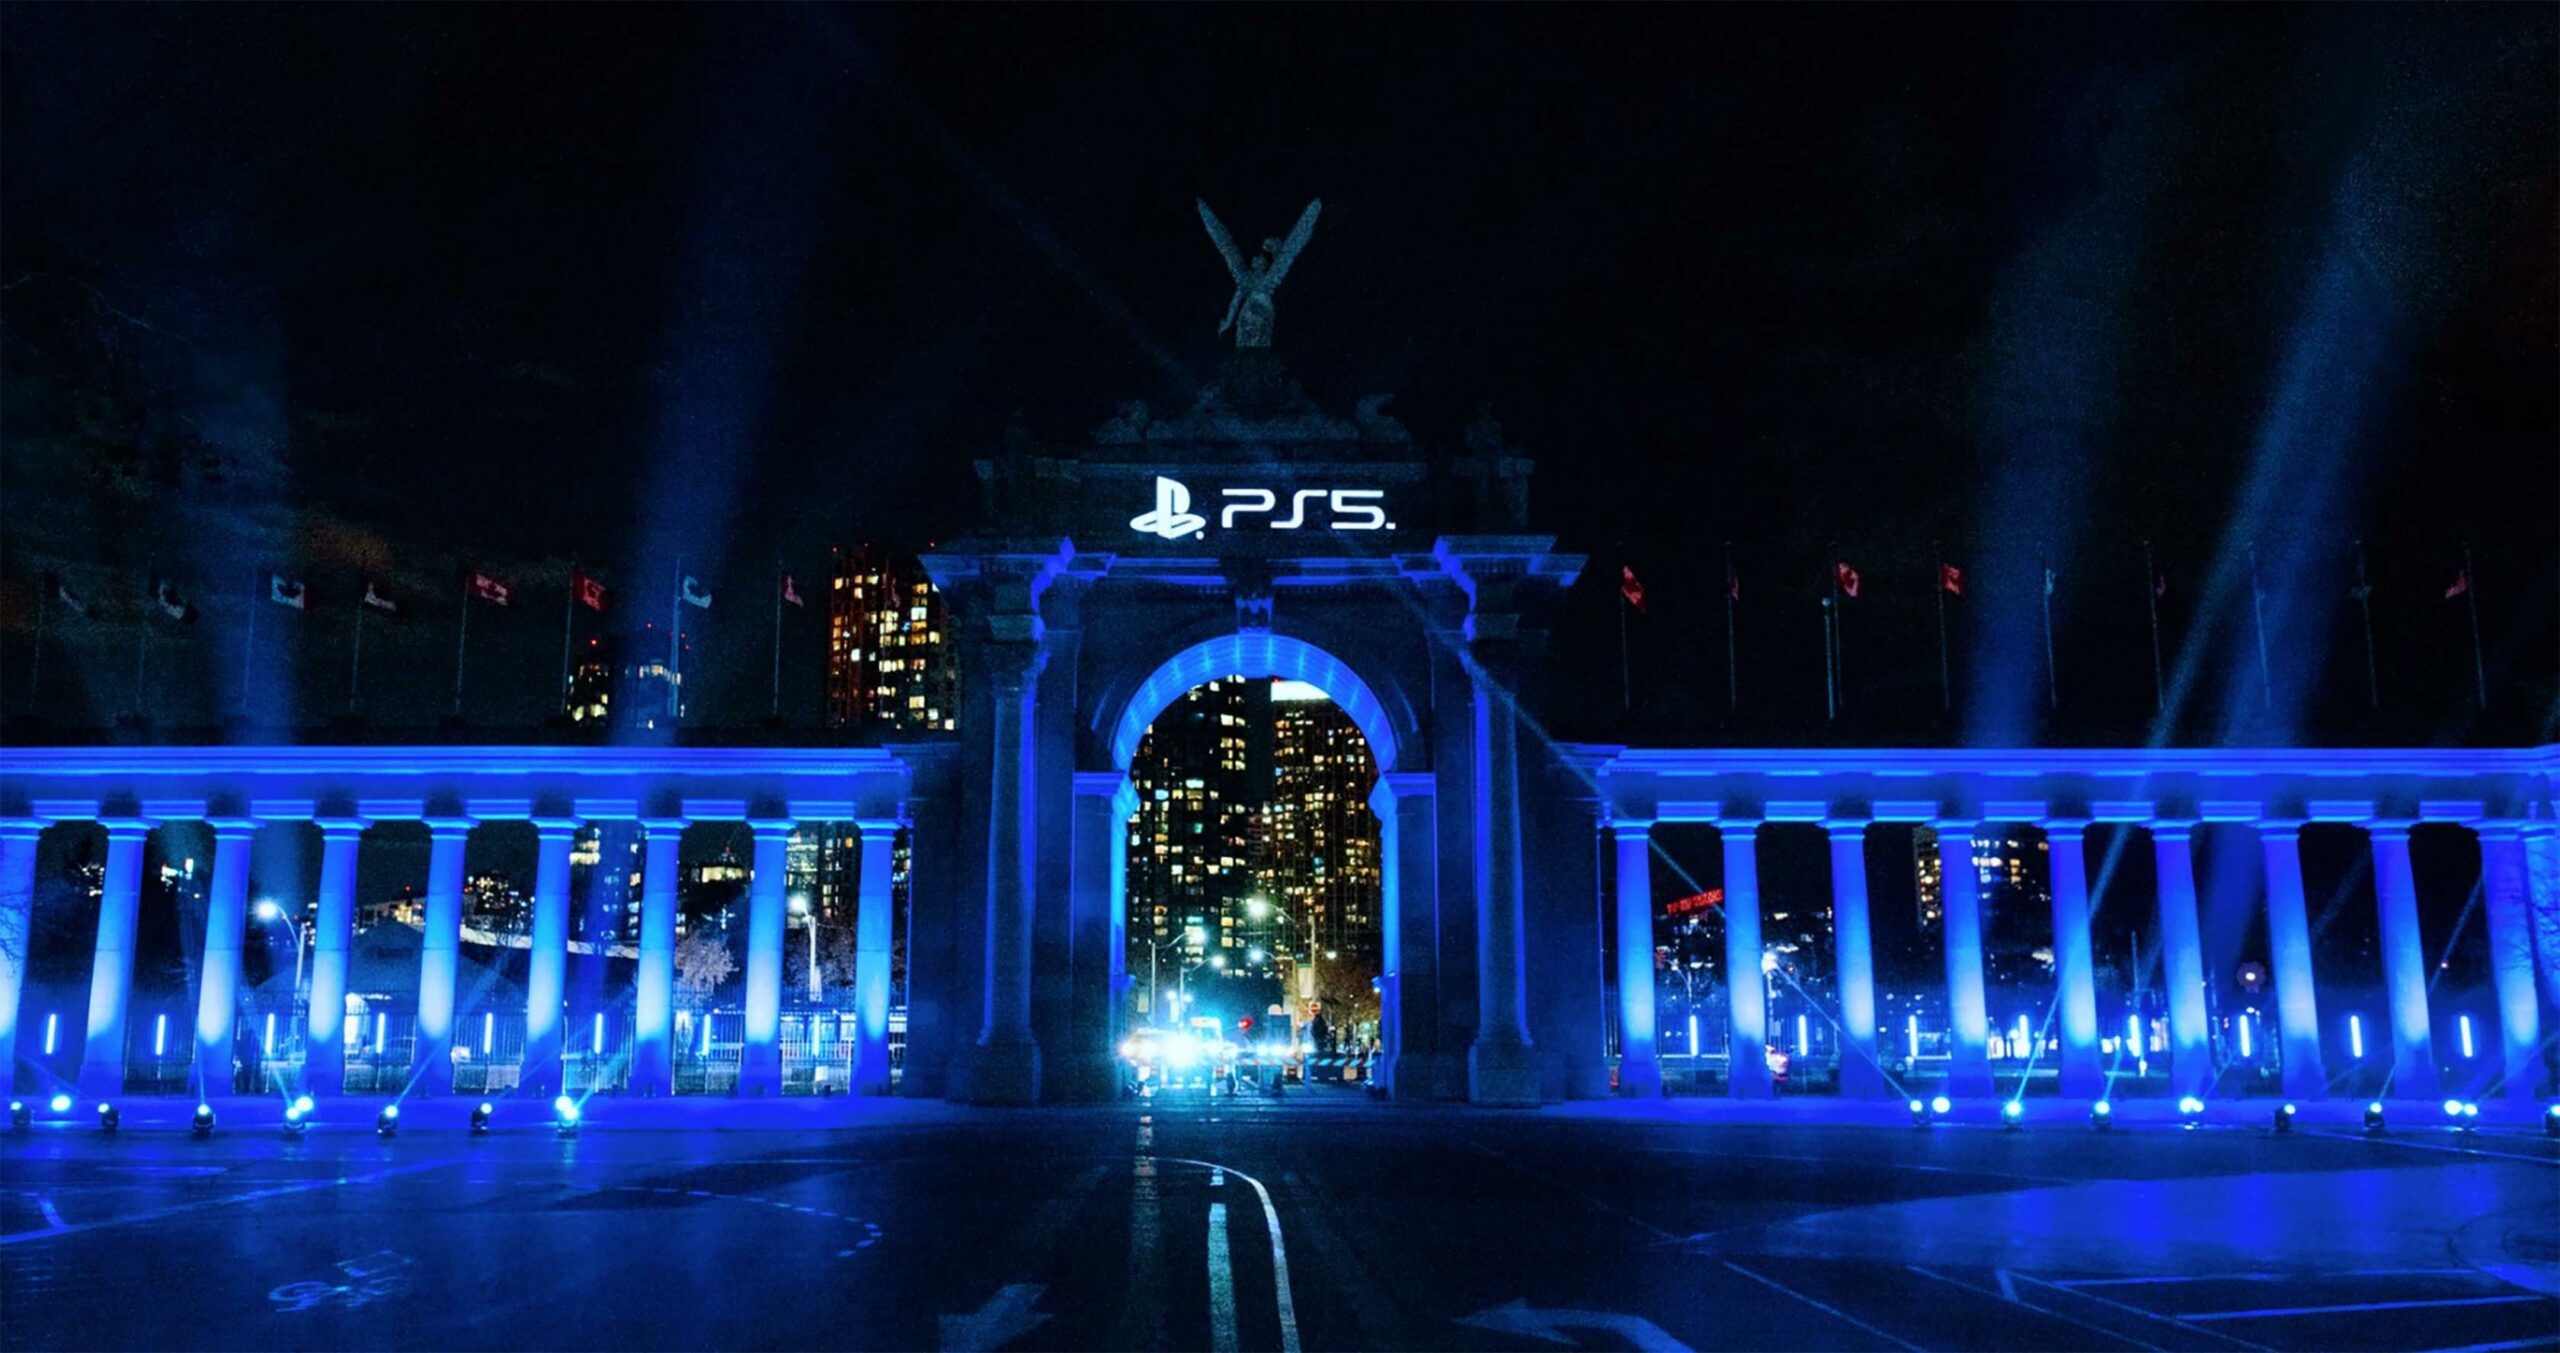 Princes' Gate in Toronto lit up last night in celebration of PS5 launch